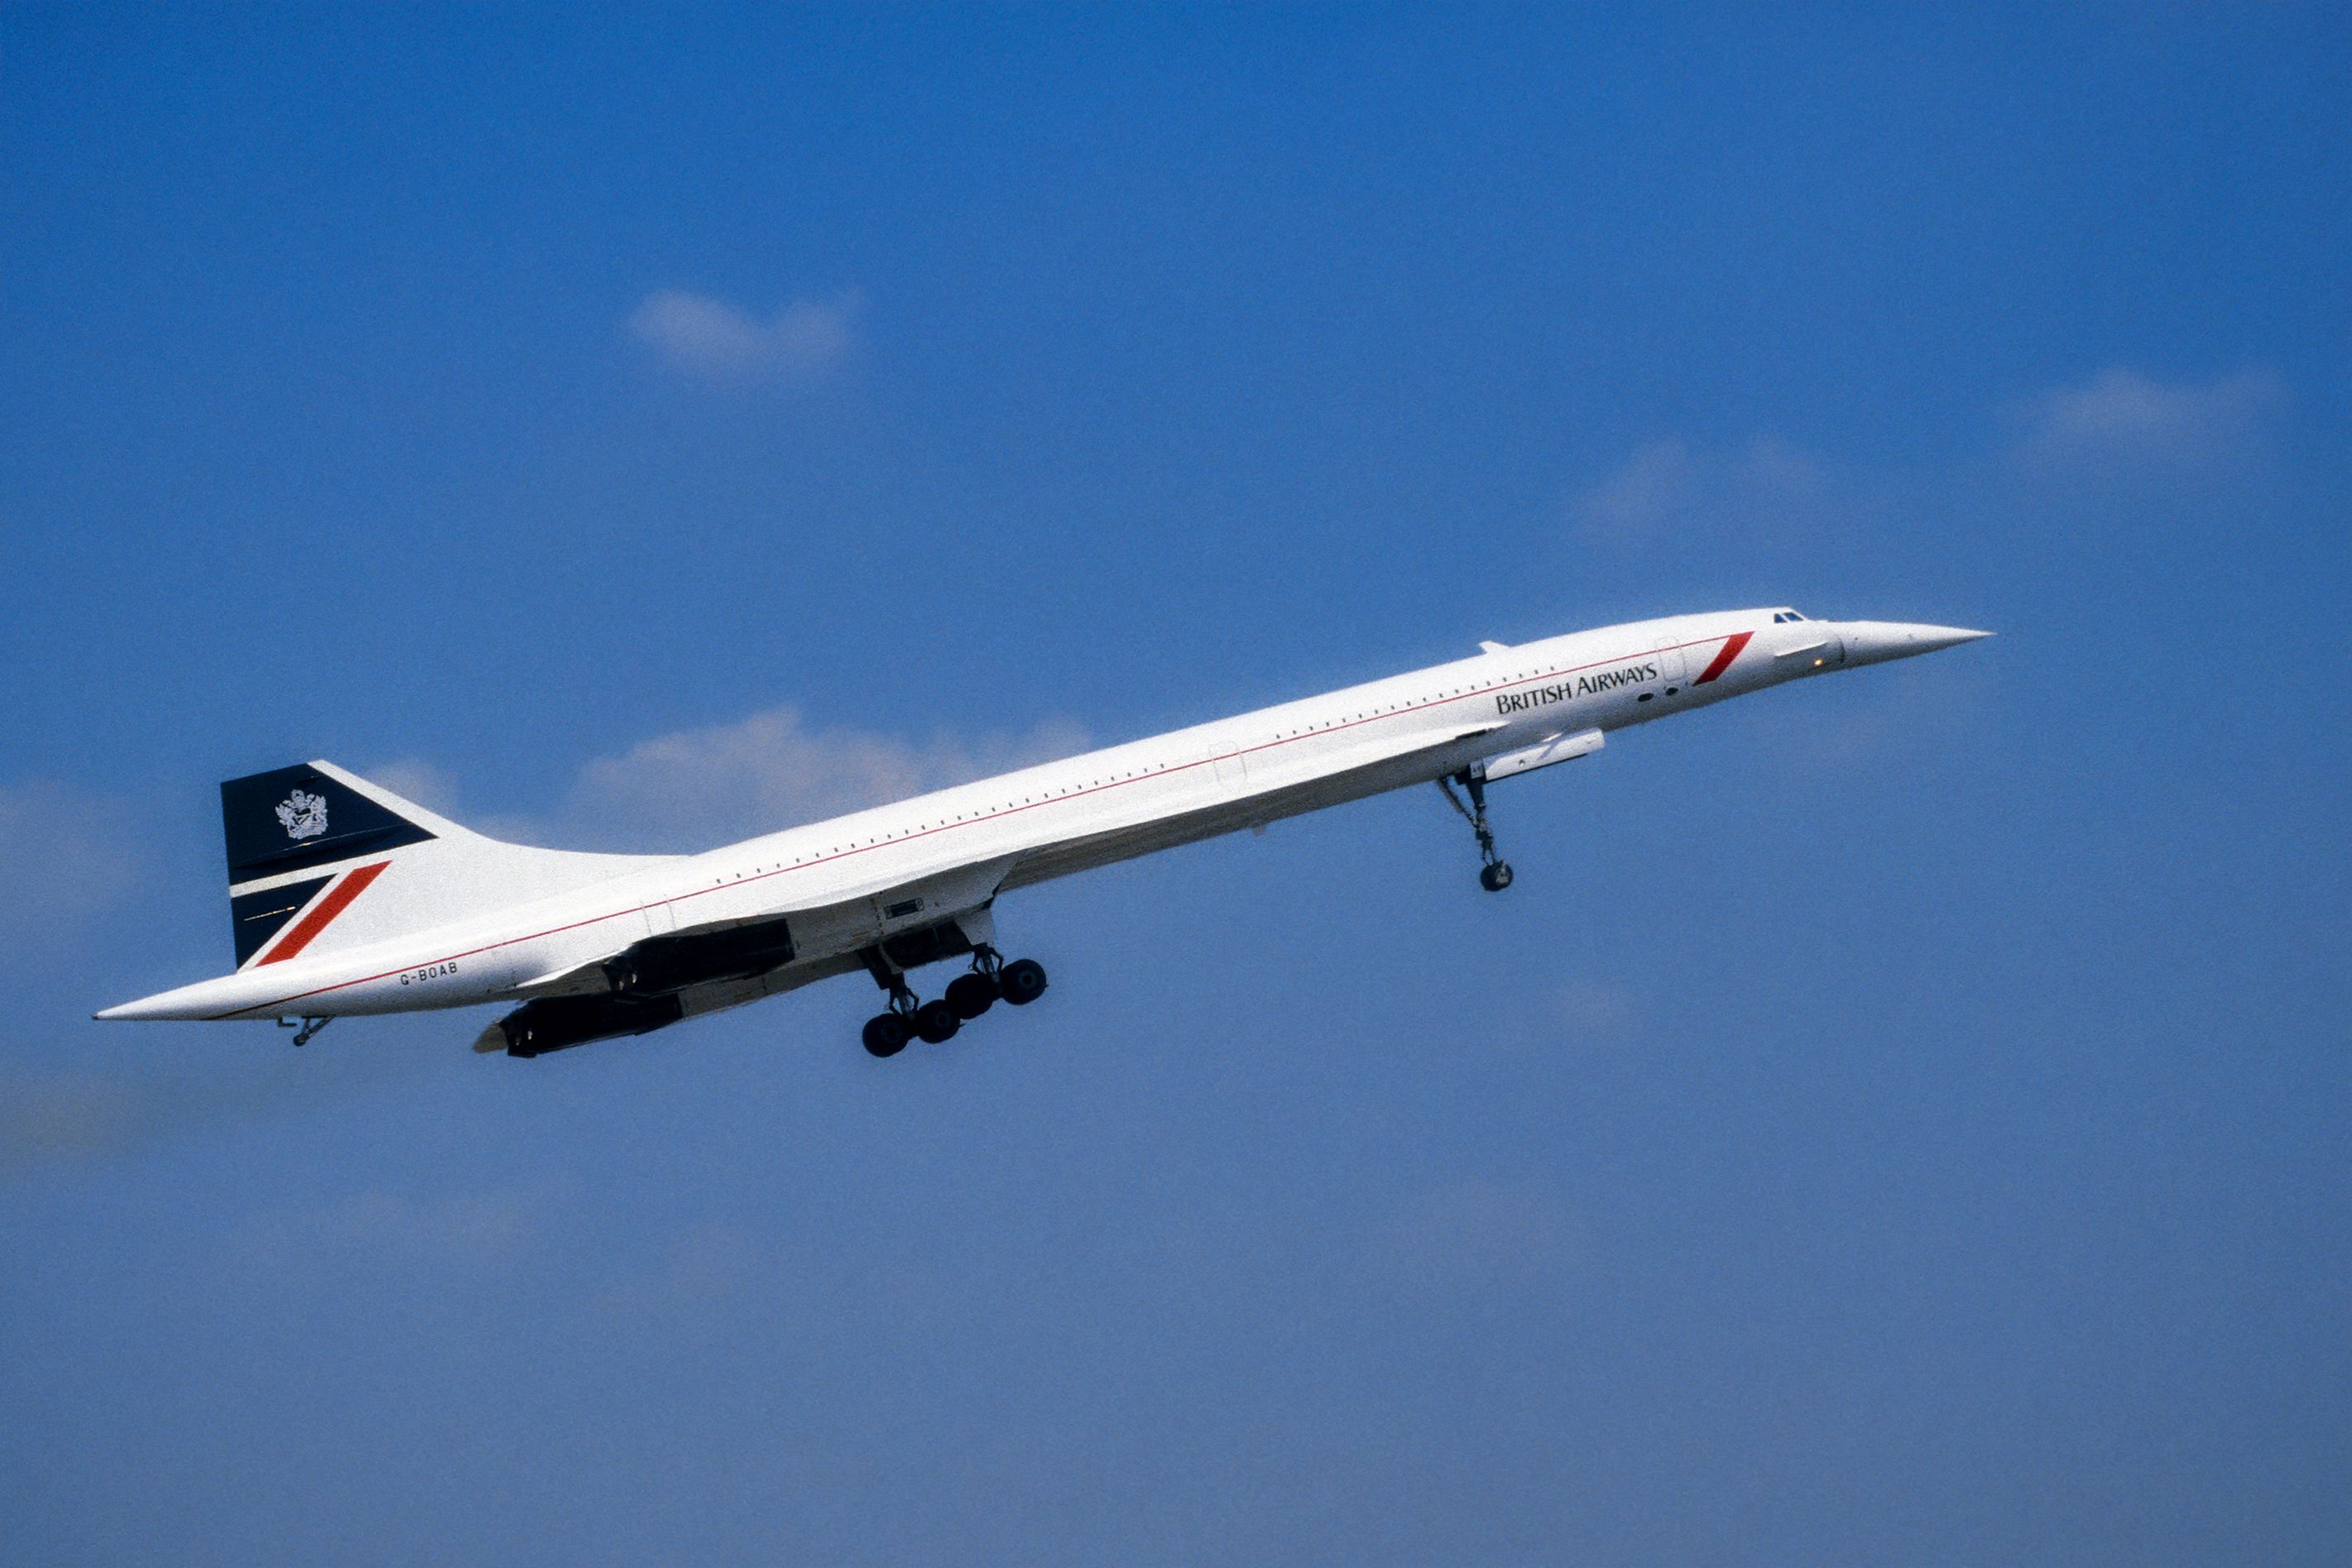 A British Airways Concorde Flying In the Sky.